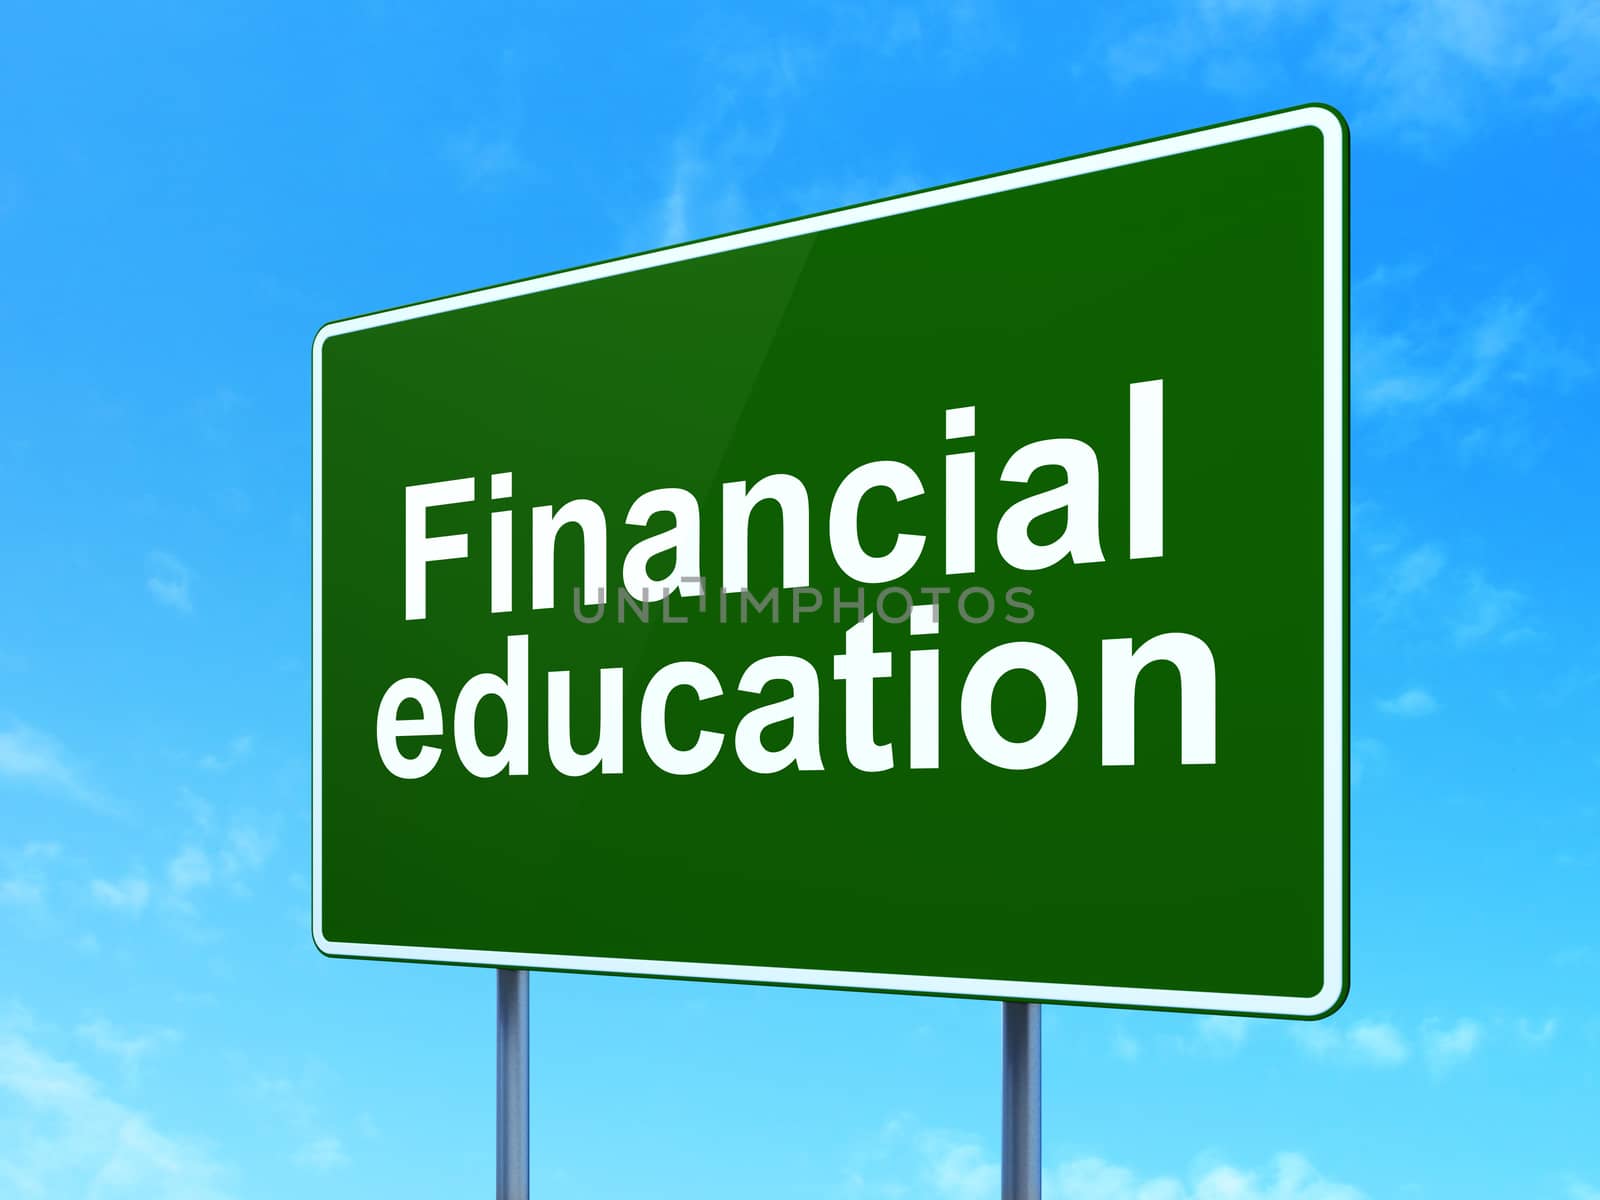 Education concept: Financial Education on green road highway sign, clear blue sky background, 3d render